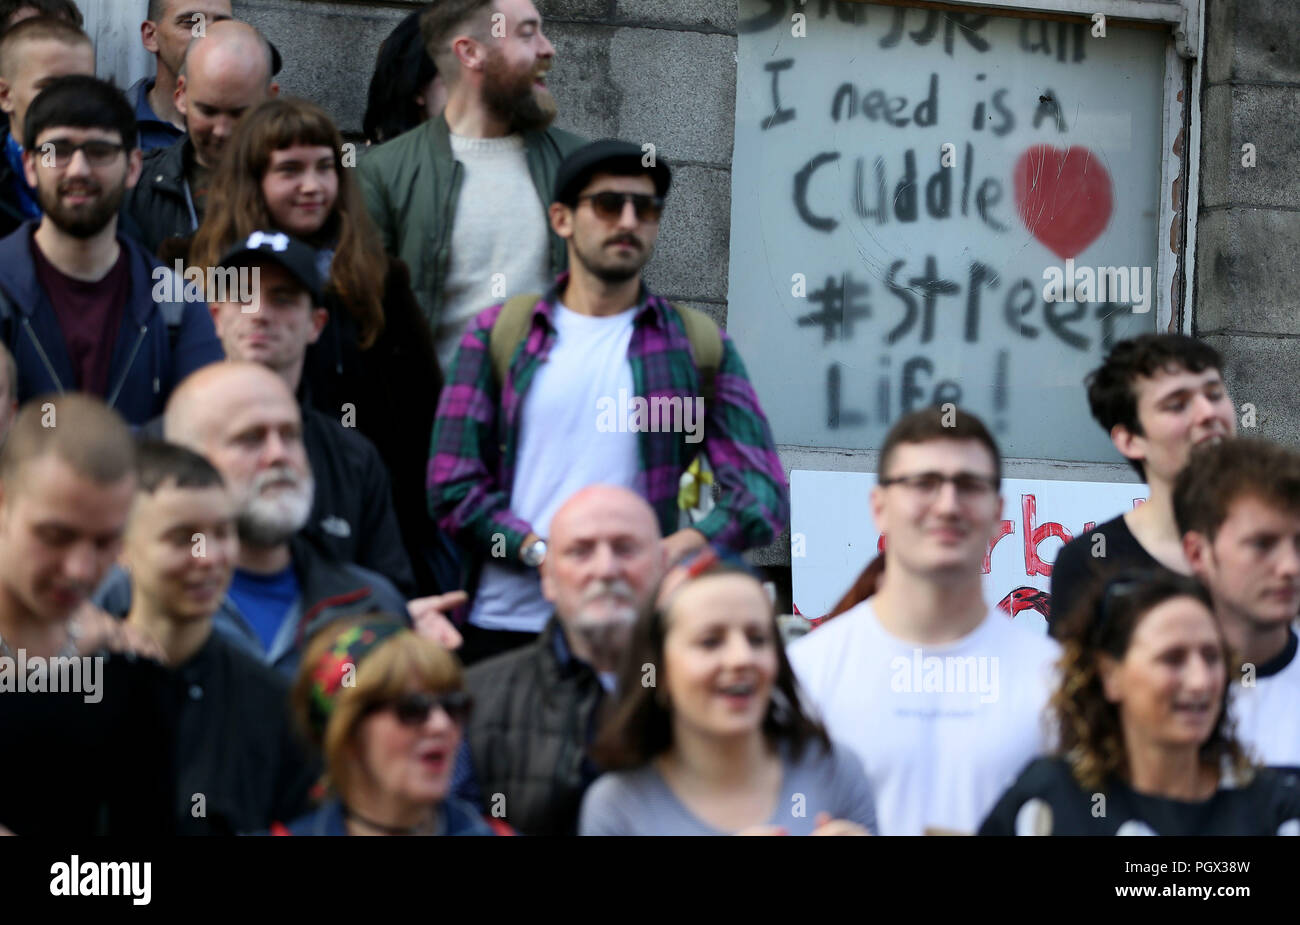 People attend a rally outisde 34 Frederick St North in support of the occupiers of the building in Dublin's city centre following a High Court injunction ordering them to leave by 2pm today. Stock Photo